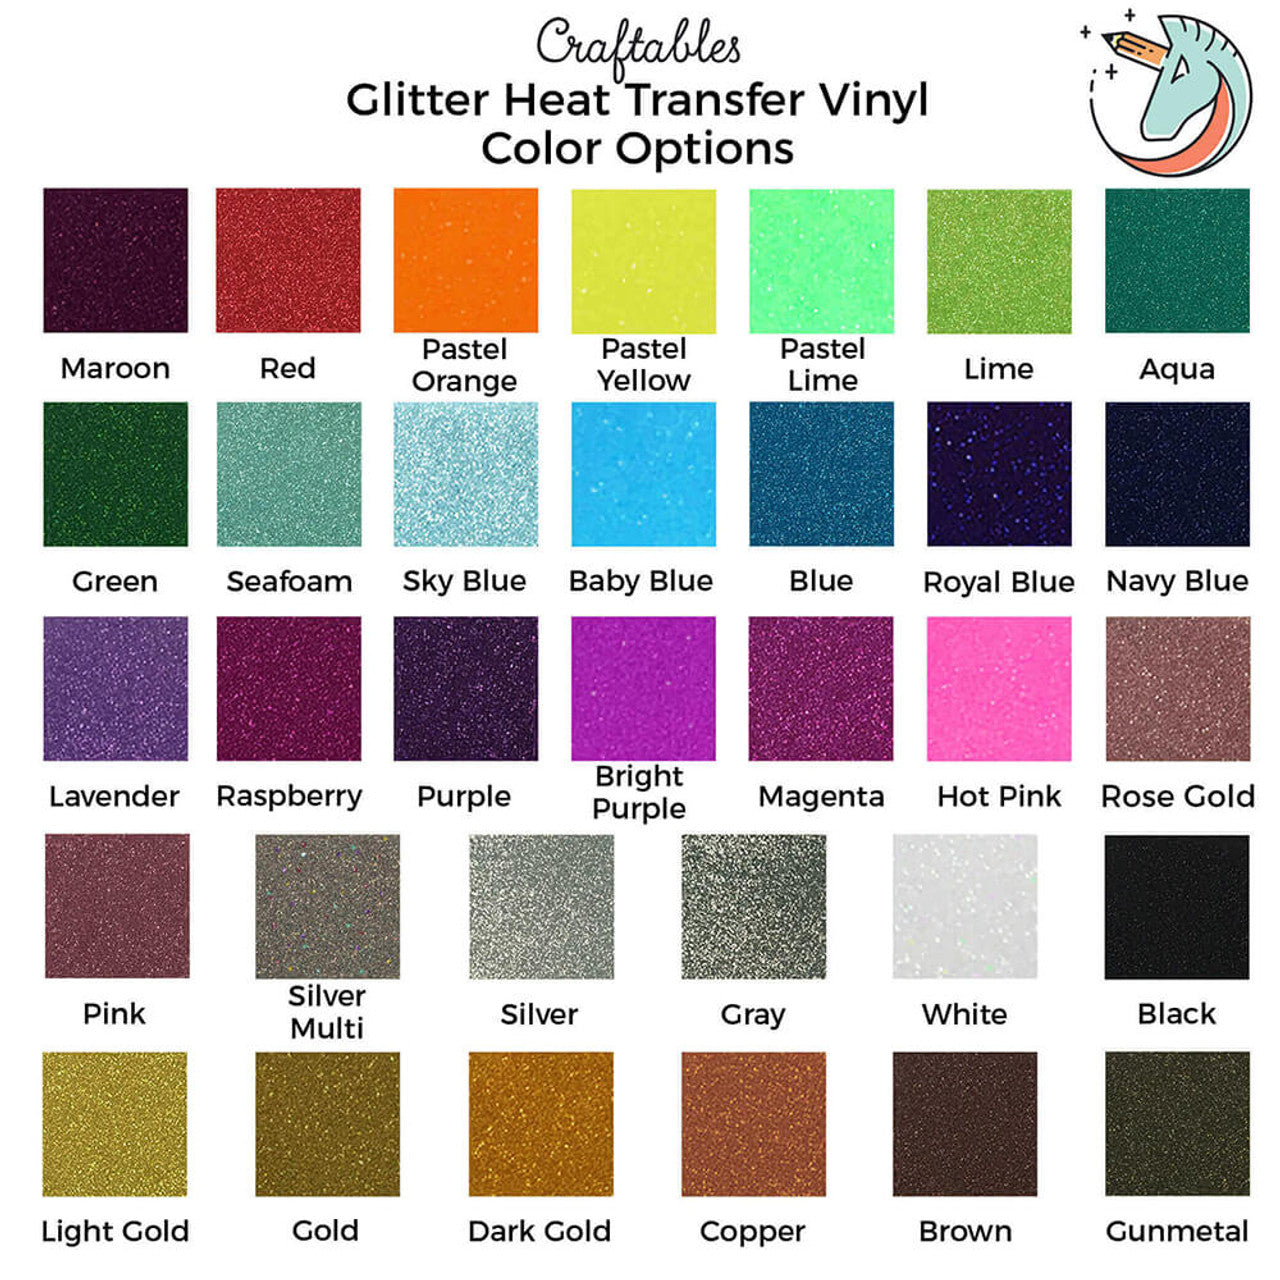 Pastel Yellow Glitter Heat Transfer Vinyl Sheets By Craftables